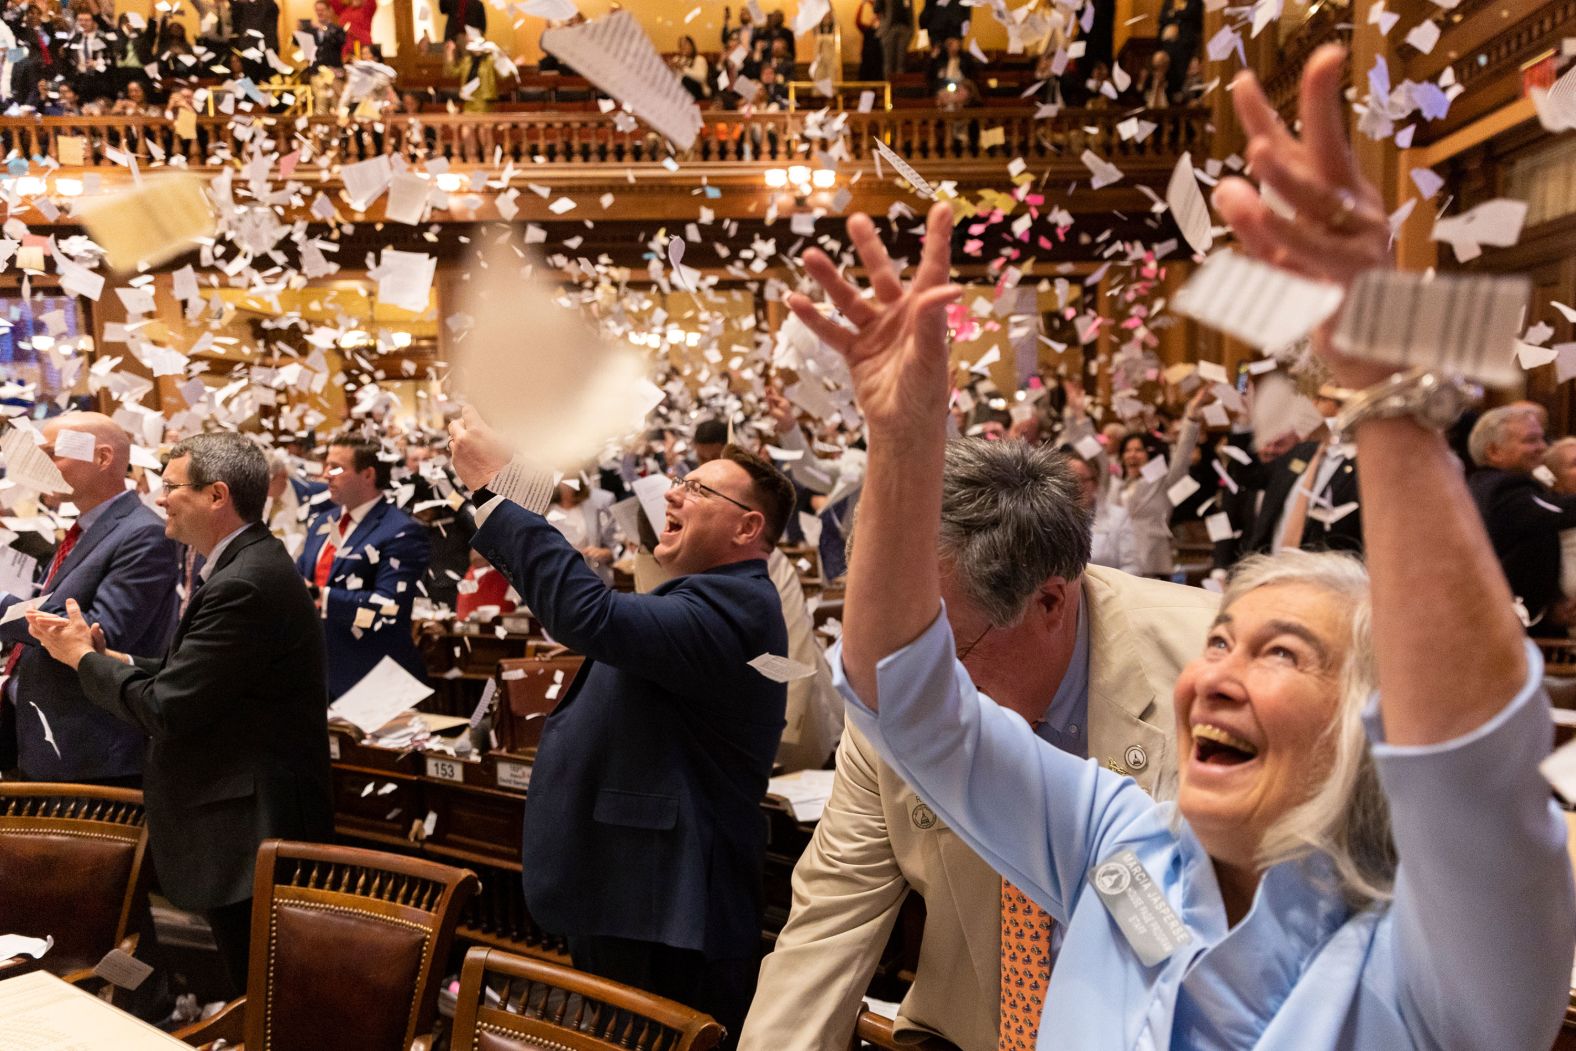 Georgia state representatives throw paper in the air to celebrate the end of the legislative session in Atlanta on Thursday, March 28.